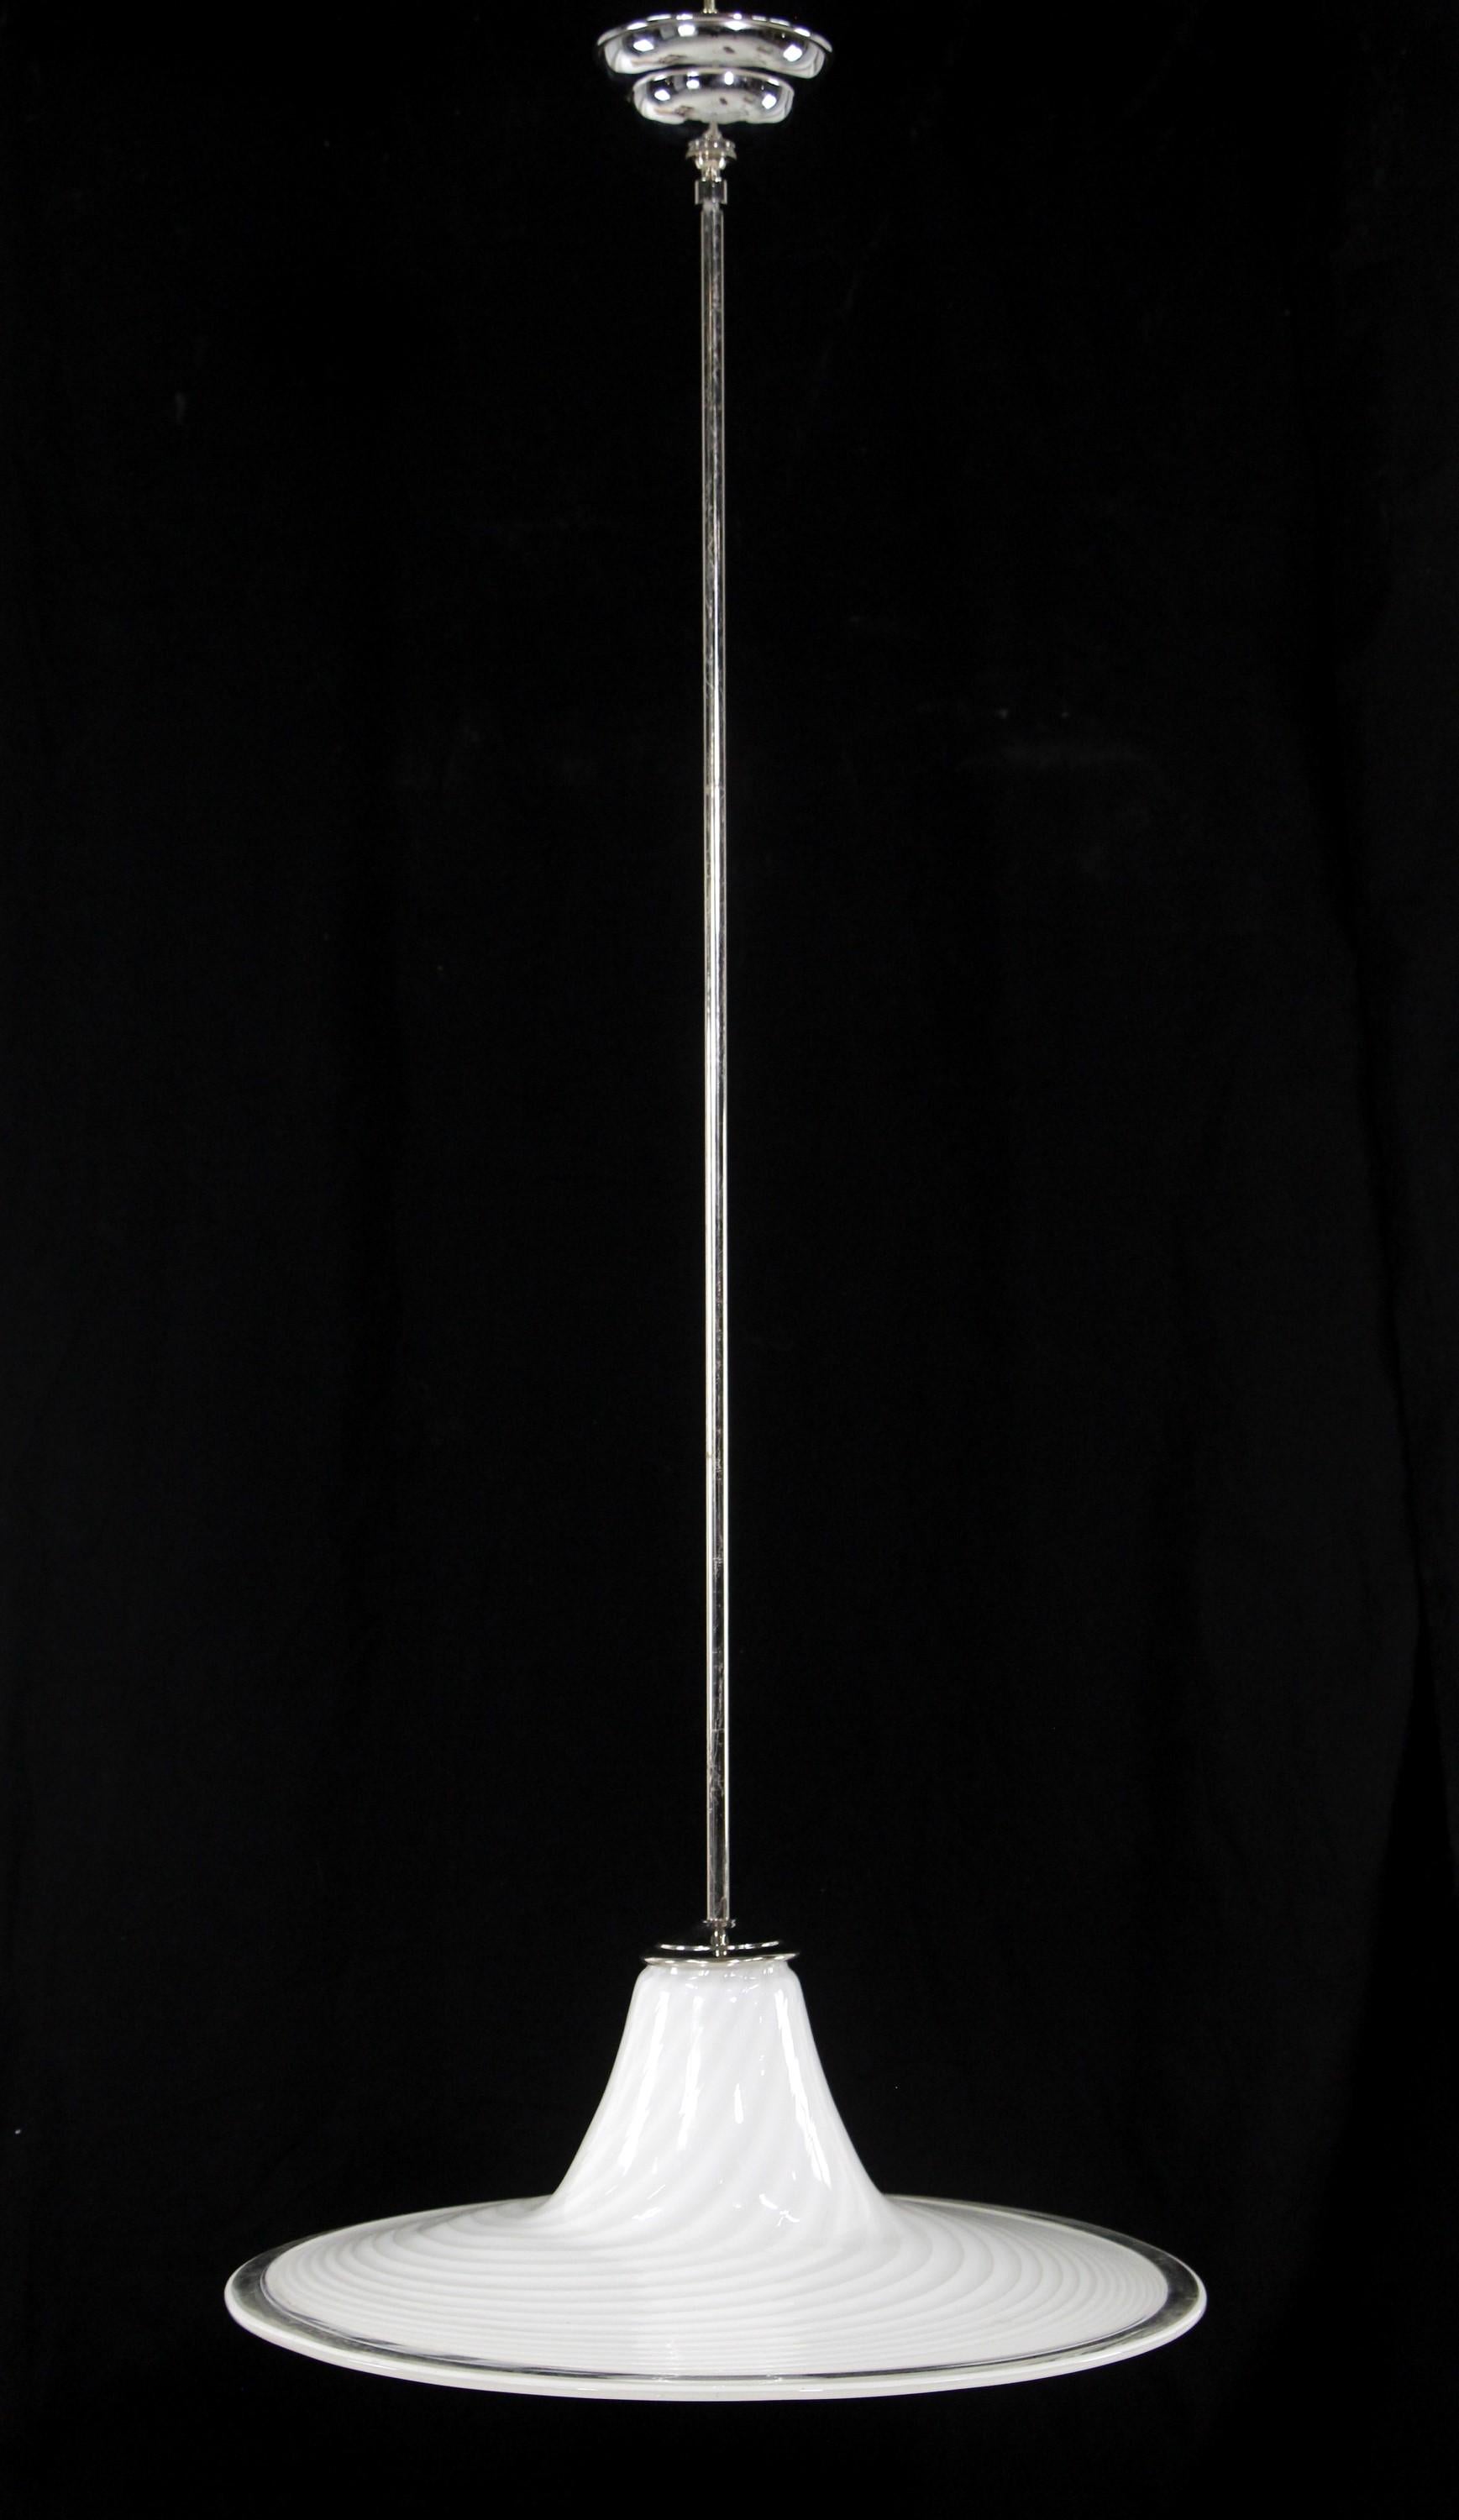 Late 20th Century white and clear Vetri Murano Italian hand formed glass pendant light featuring subtle swirls. Updated with new polished nickel plated brass pole and canopy. Newly rewired. This can be seen at our 400 Gilligan St location in